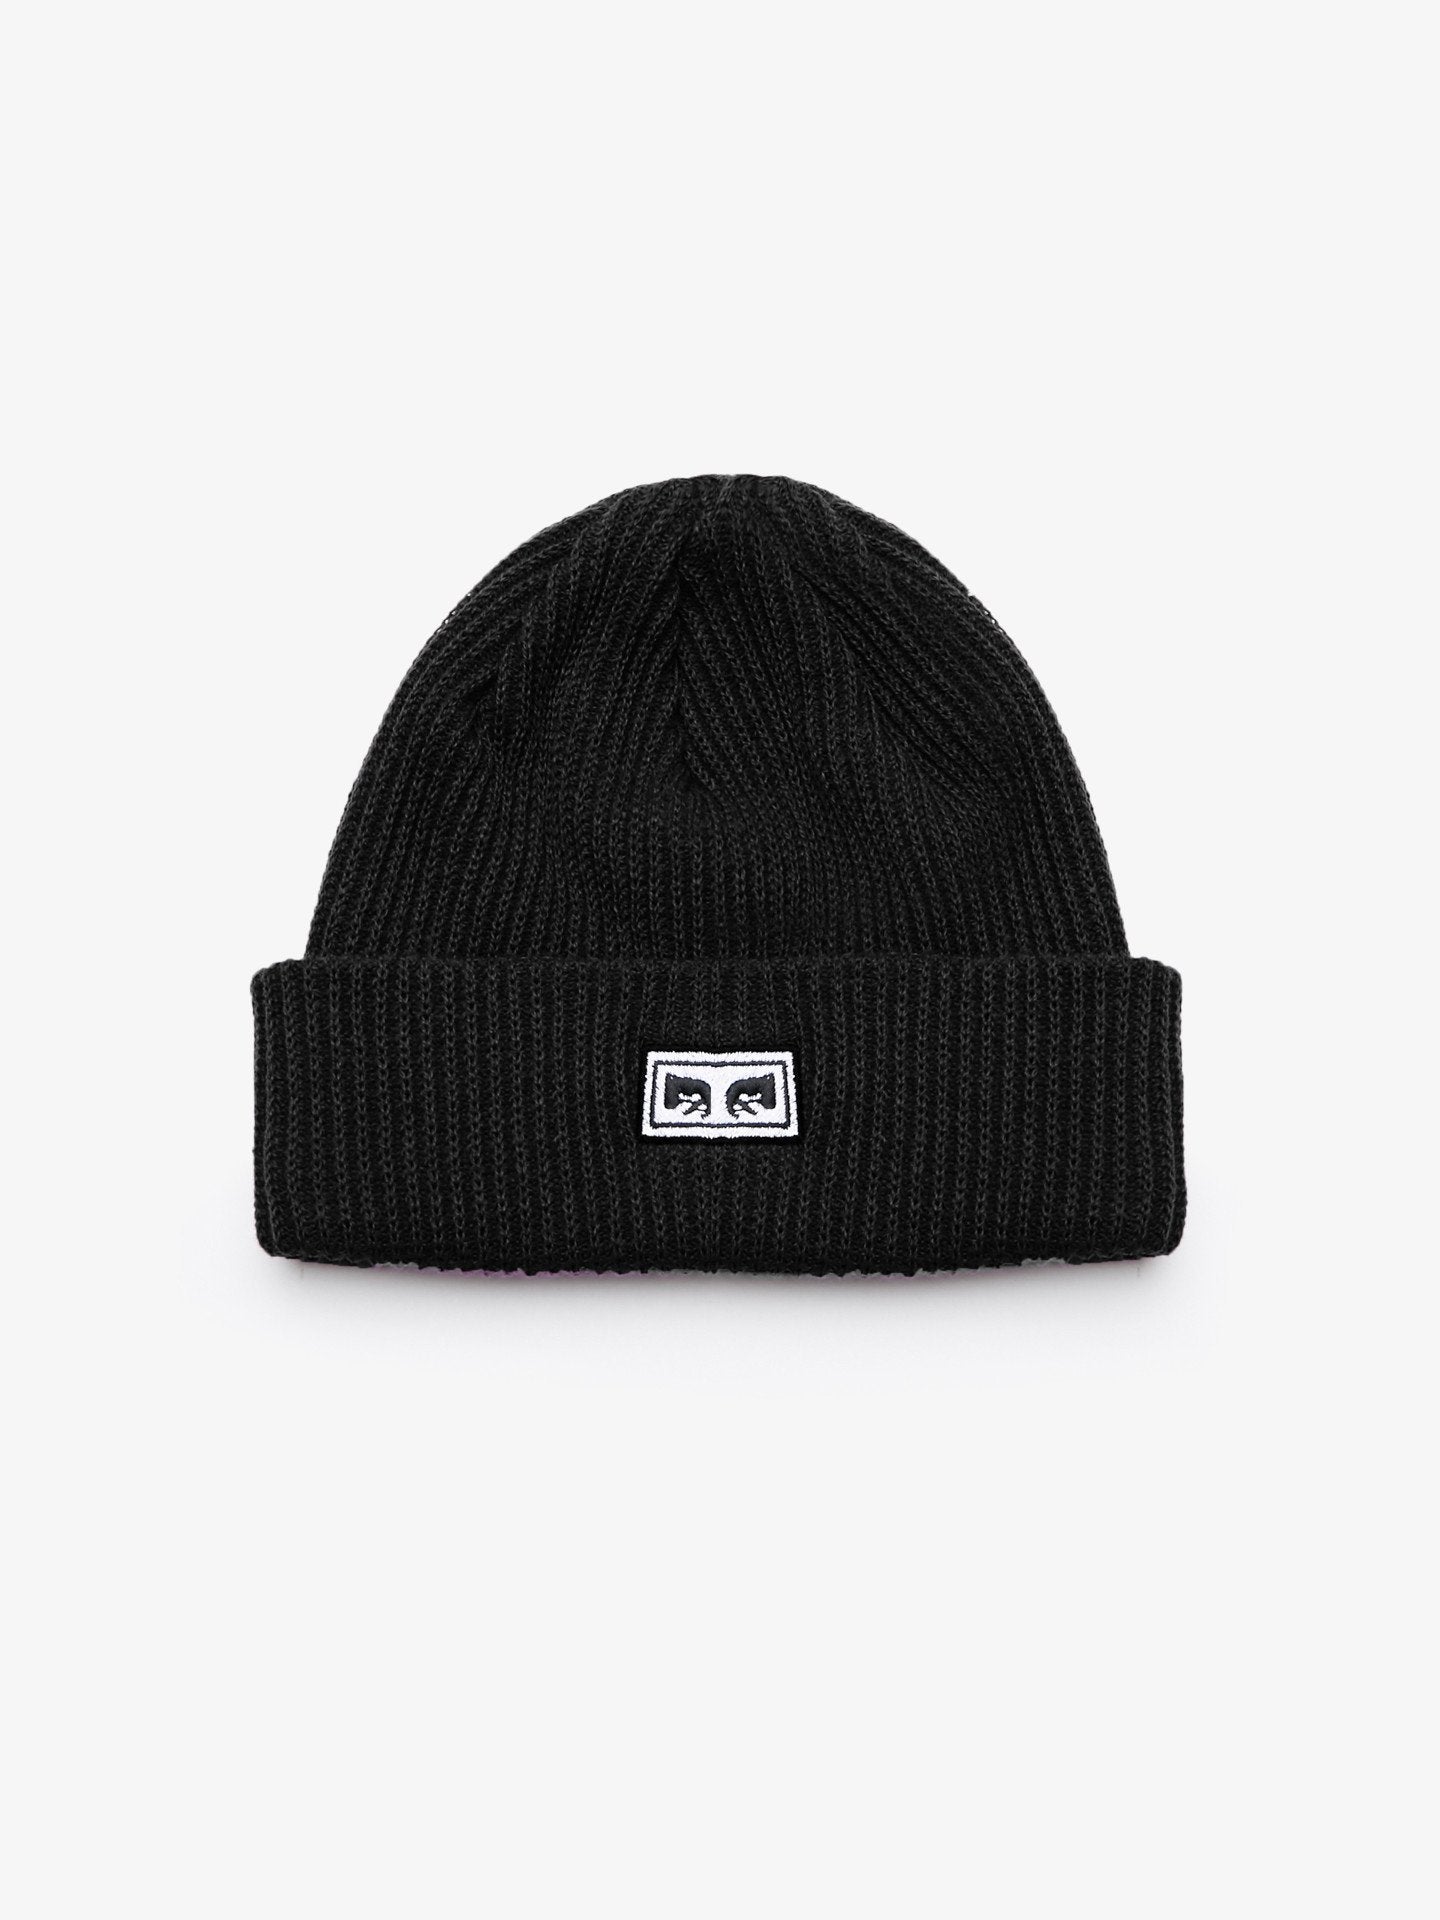 OBEY - Subversion Beanie, Black - The Giant Peach